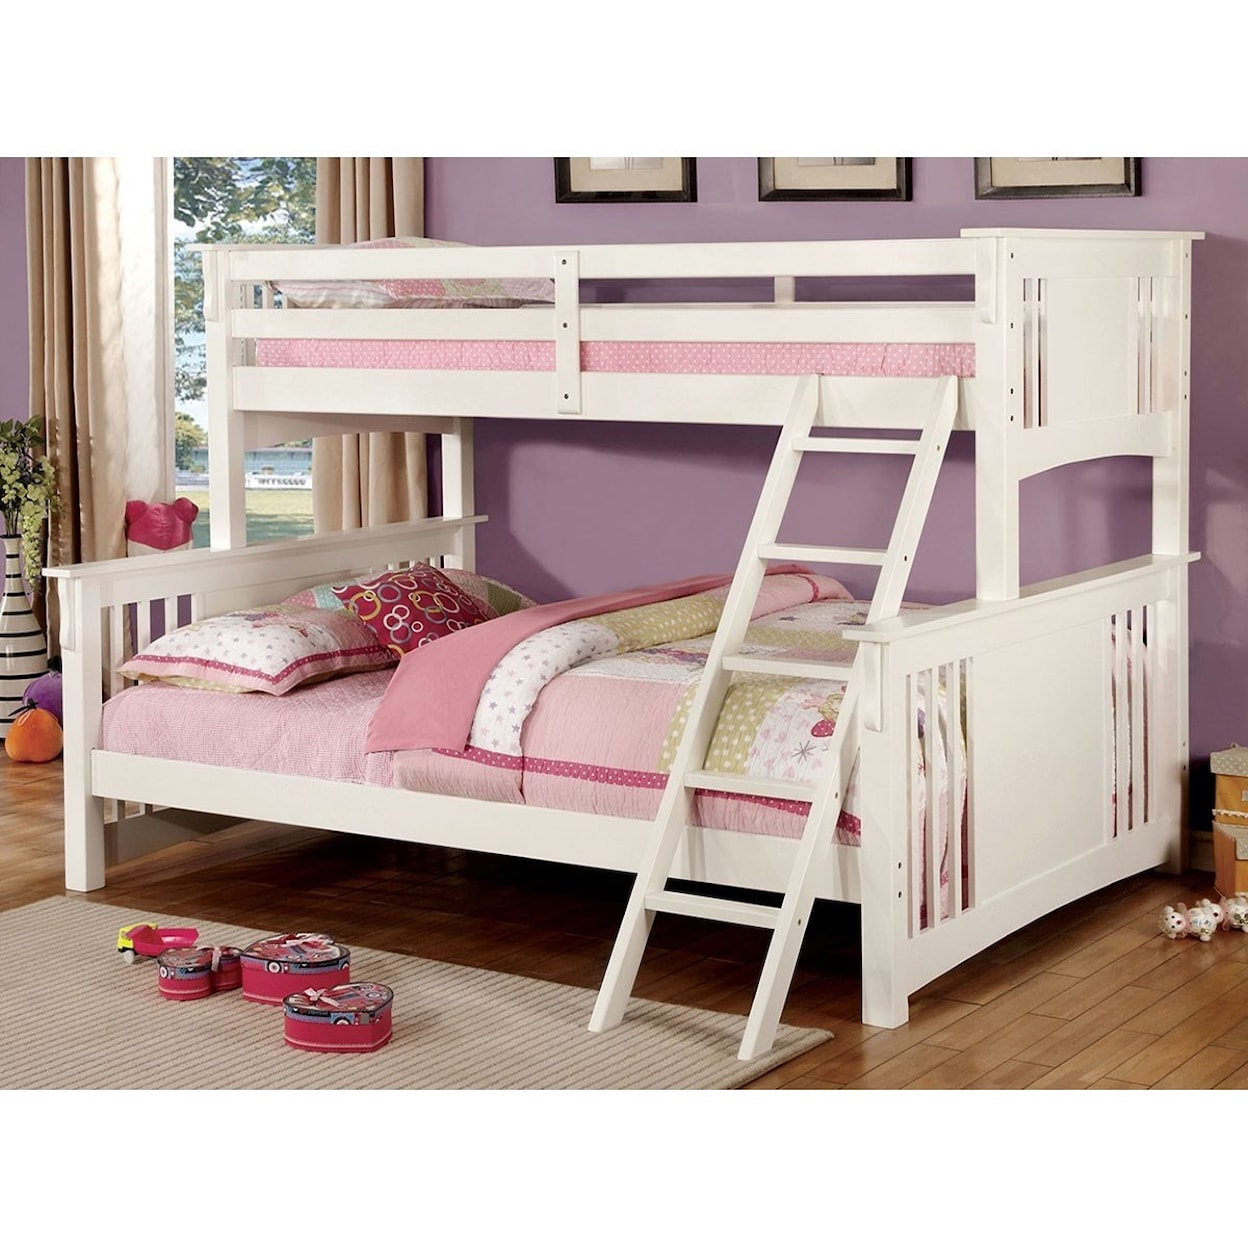 Furniture of America Spring Creek I Twin XL/Queen Bunk Bed 